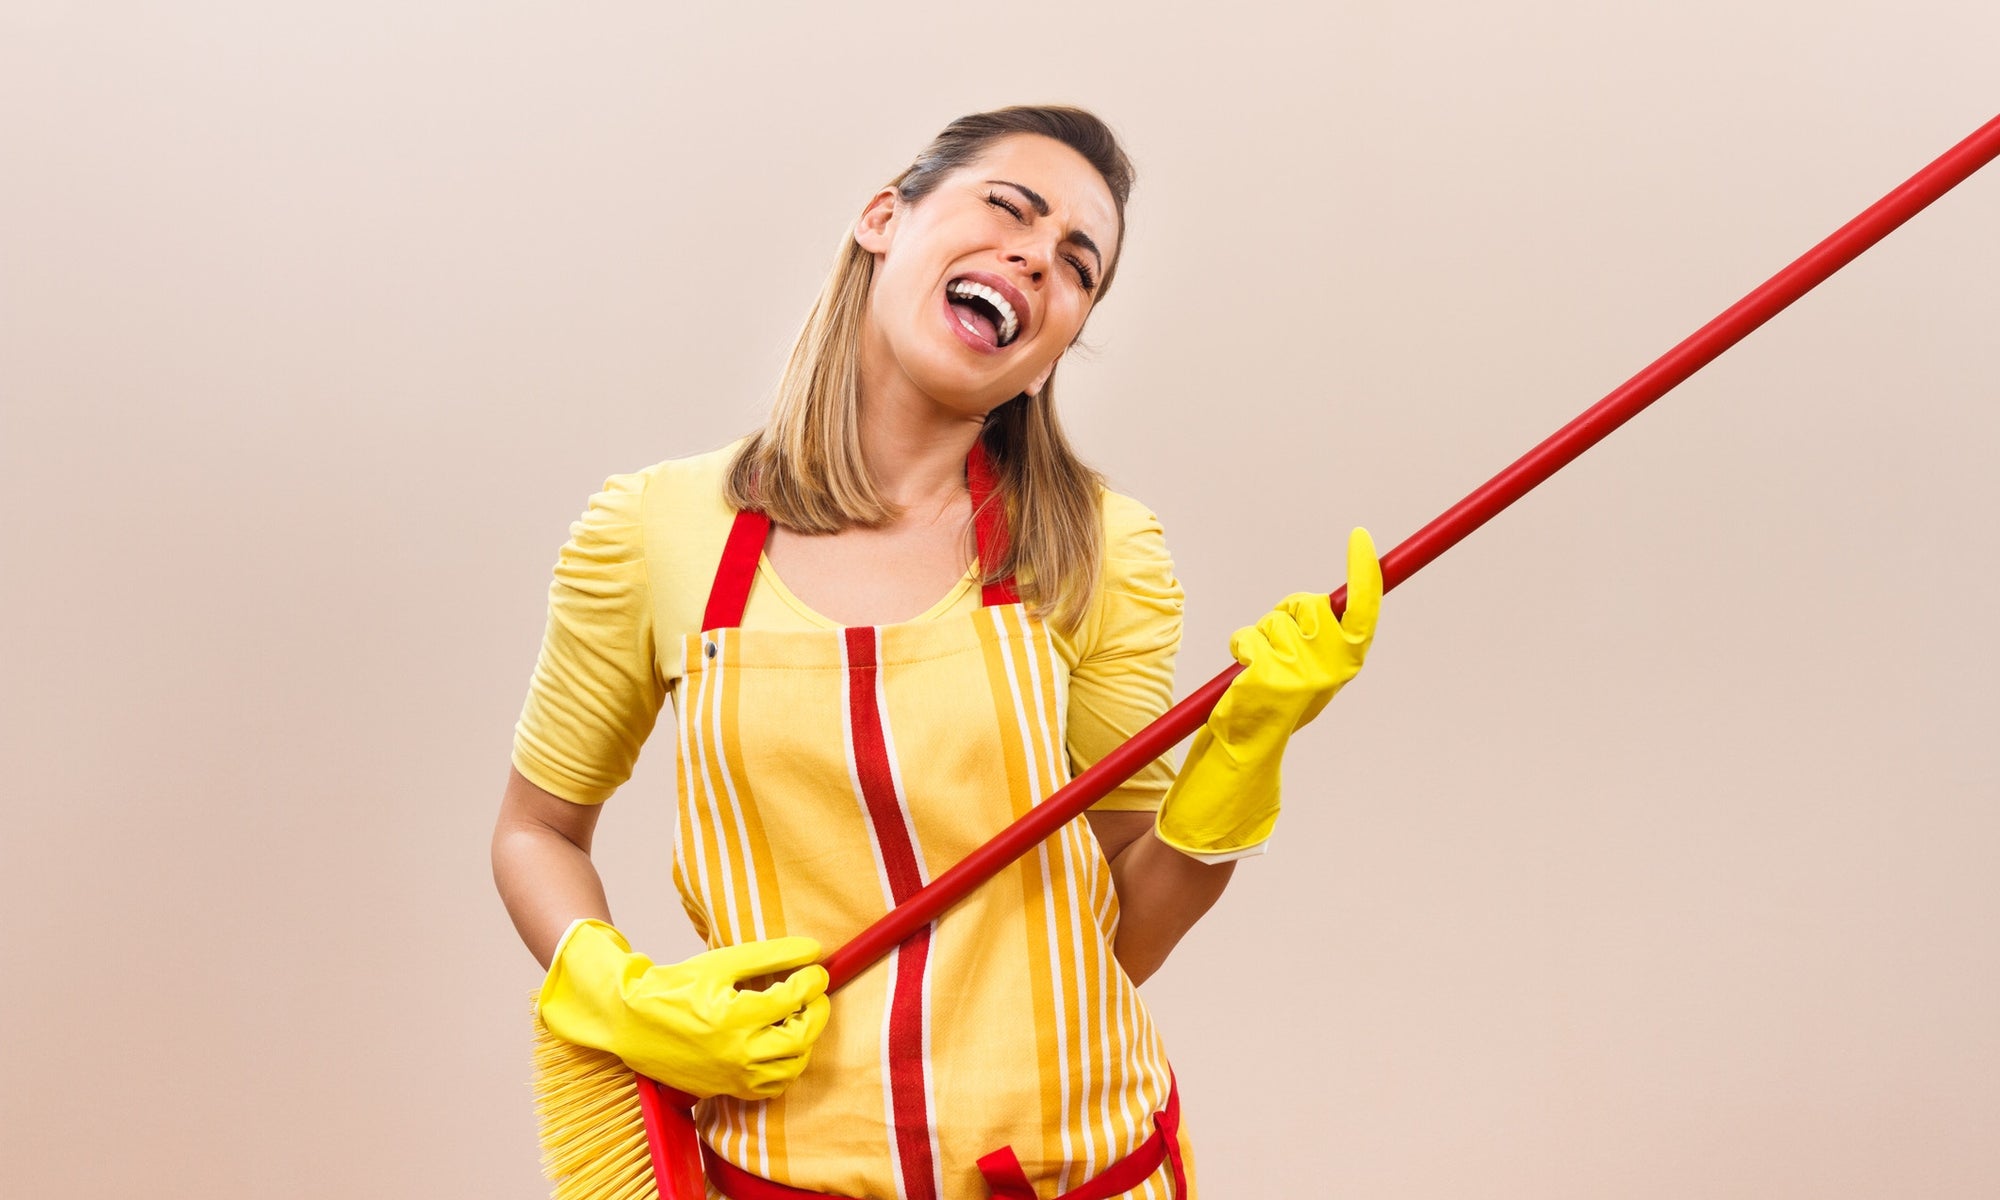 young lady teenager holding a big broom in her hands pretending it is an air guitar